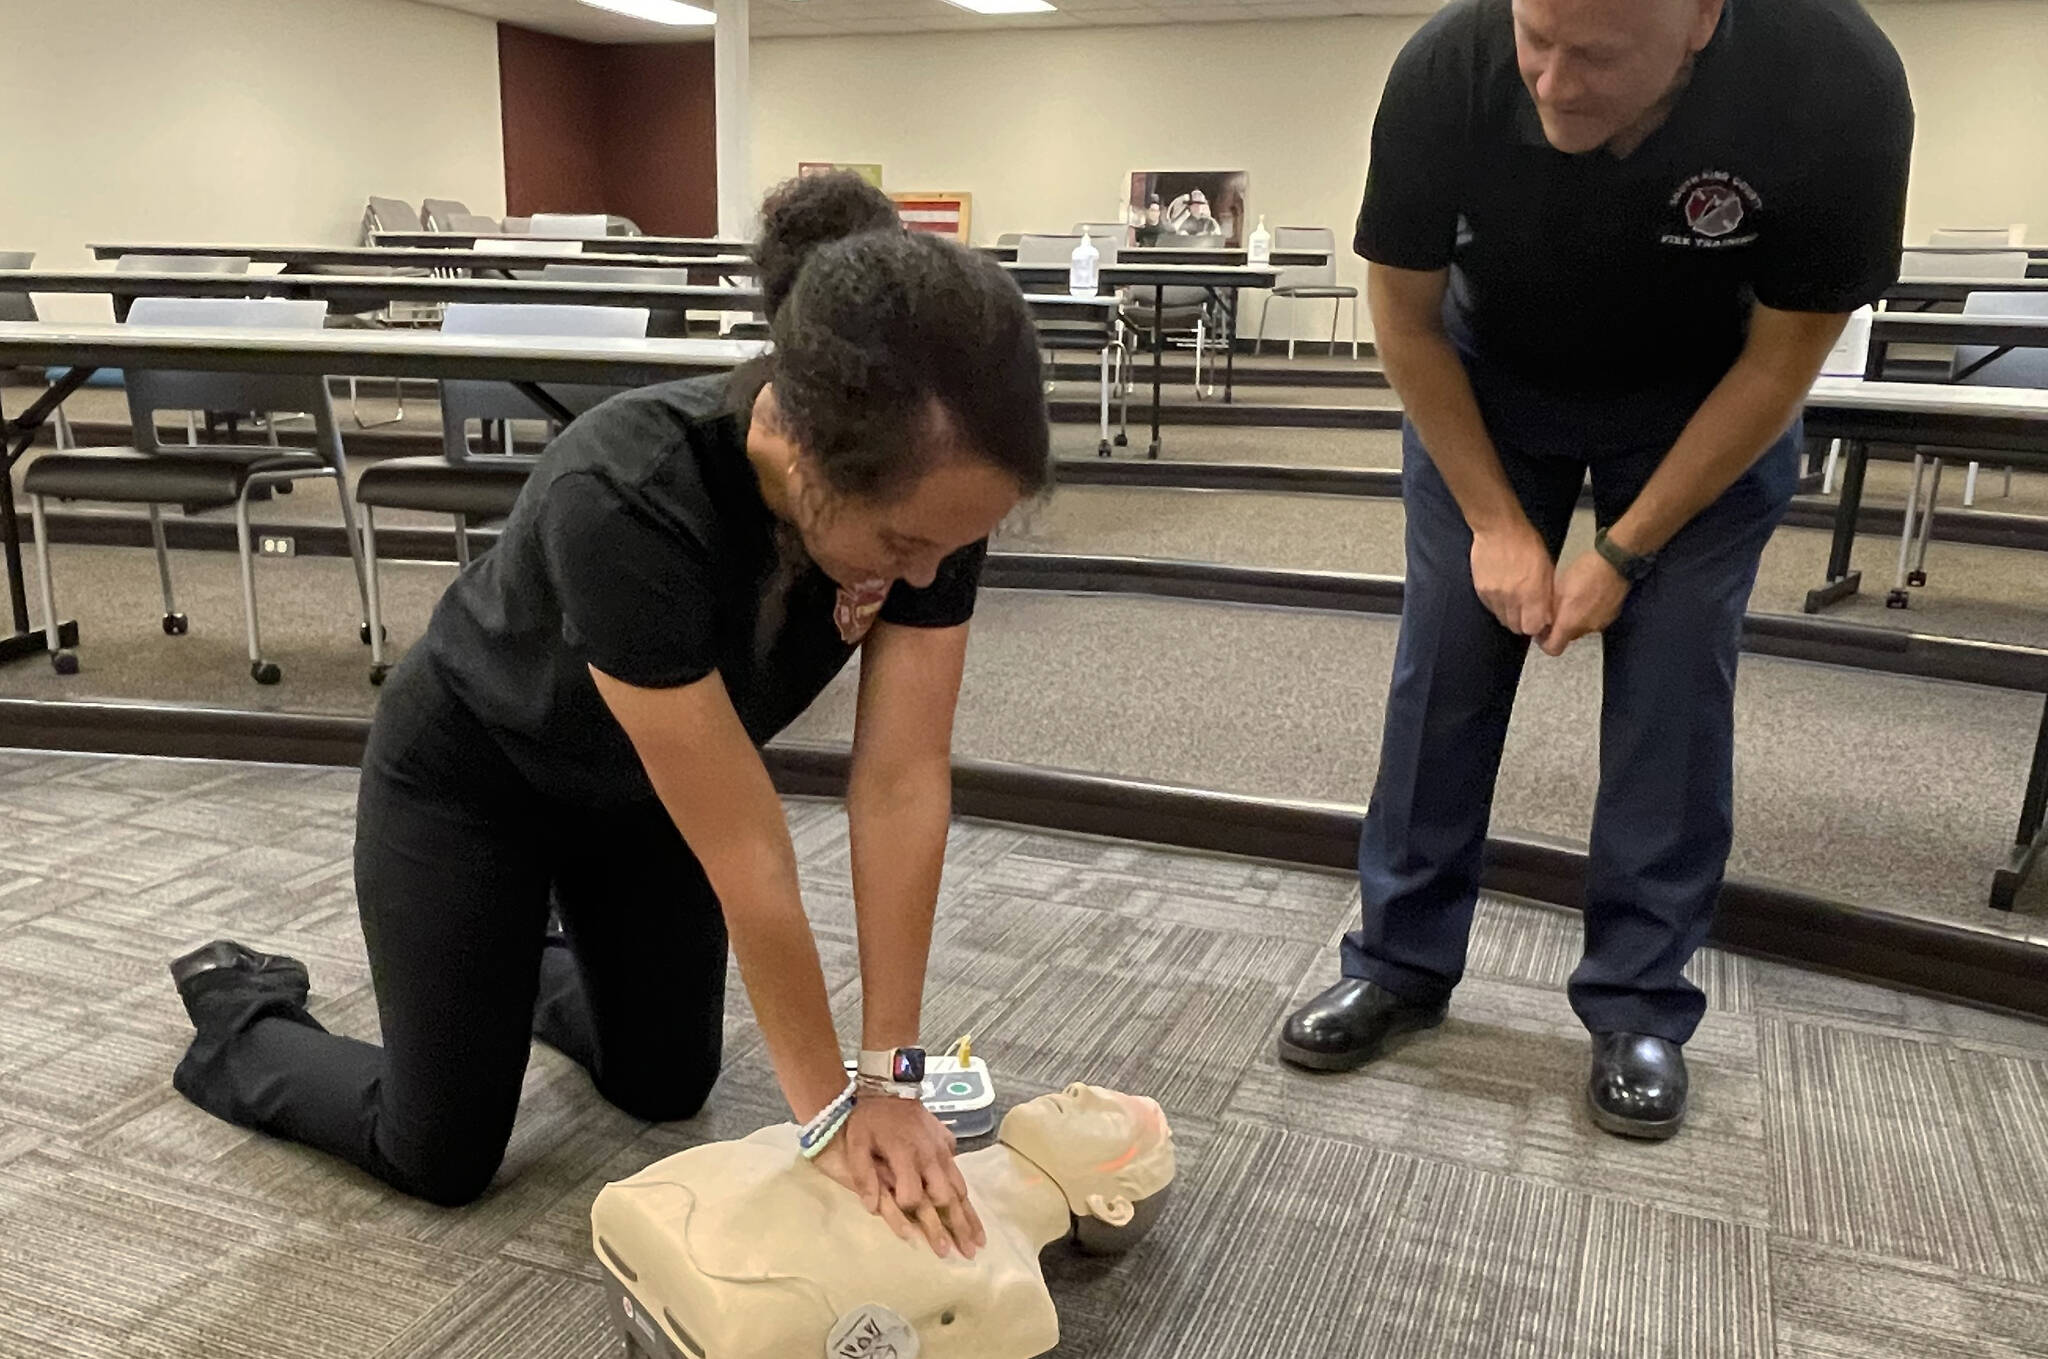 A free CPR training and career fair will run from 10 a.m. to 5 p.m. Saturday, July 13 at the accesso ShoWare Center in Kent. COURTESY PHOTO, Puget Sound Fire